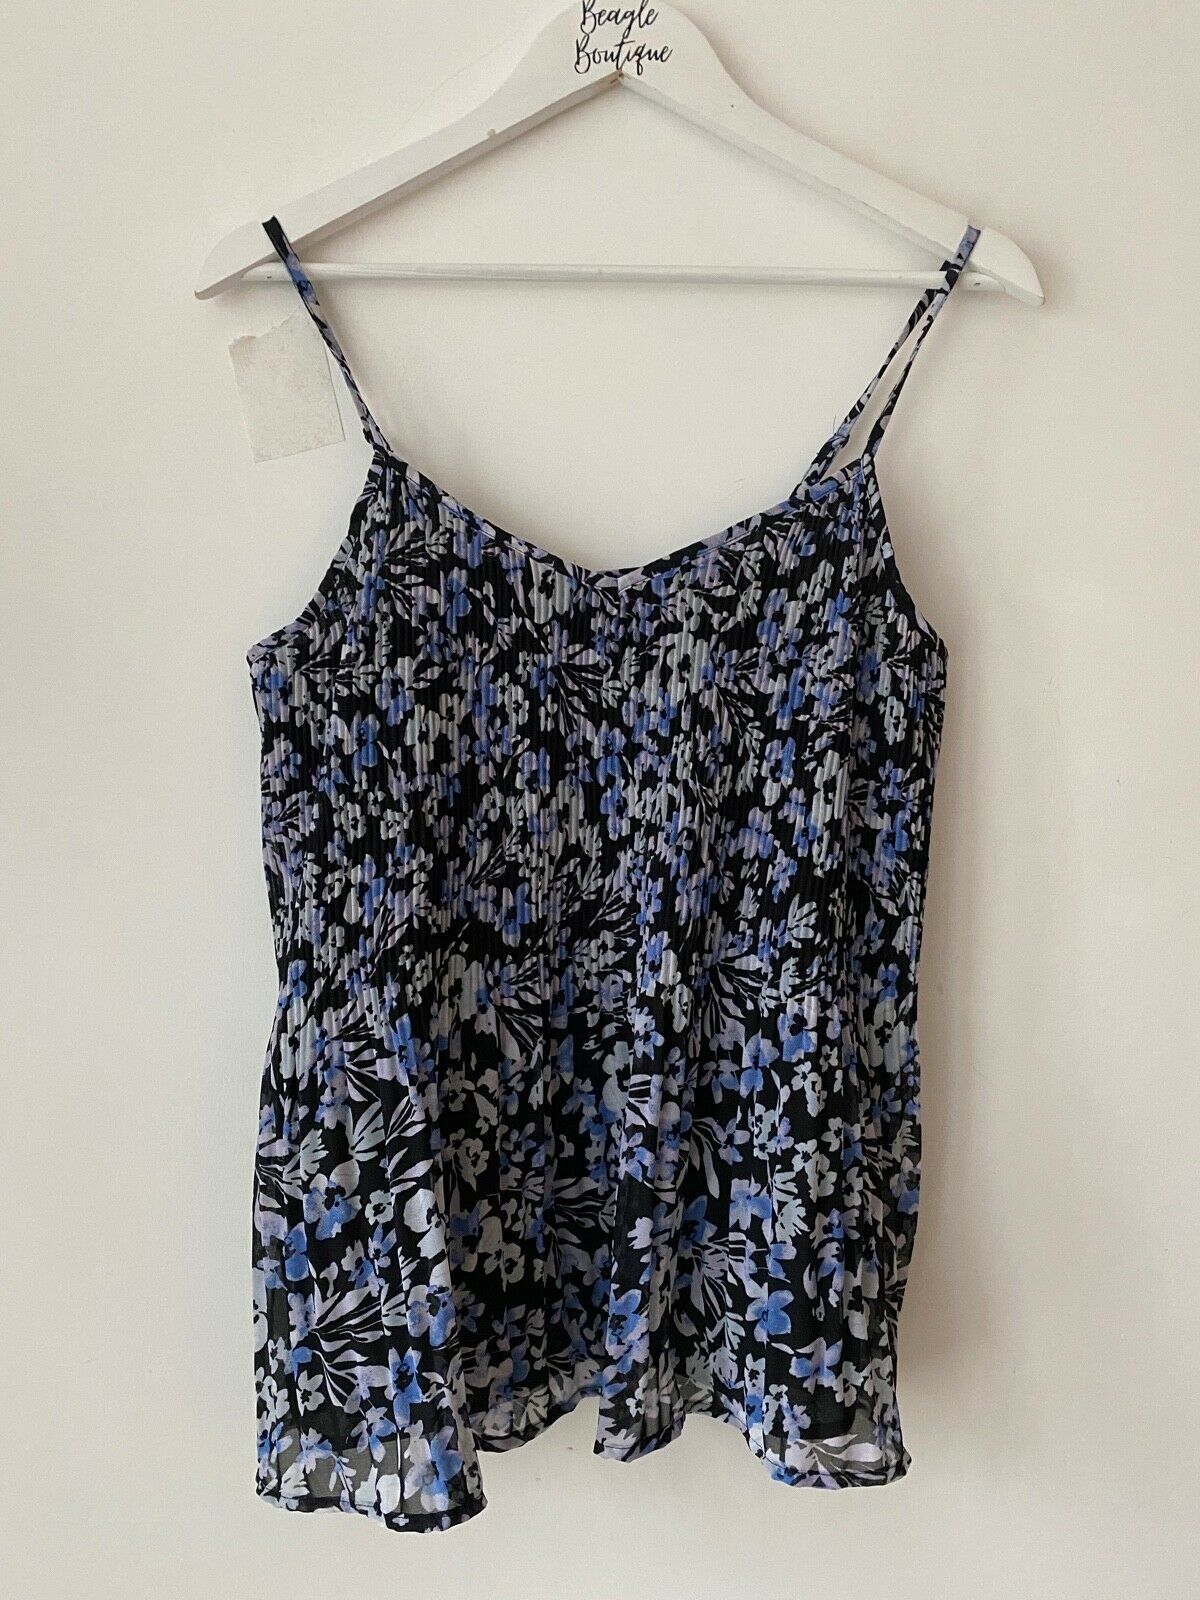 Very Pintuck Lined Vest Top Sizes 10, 12